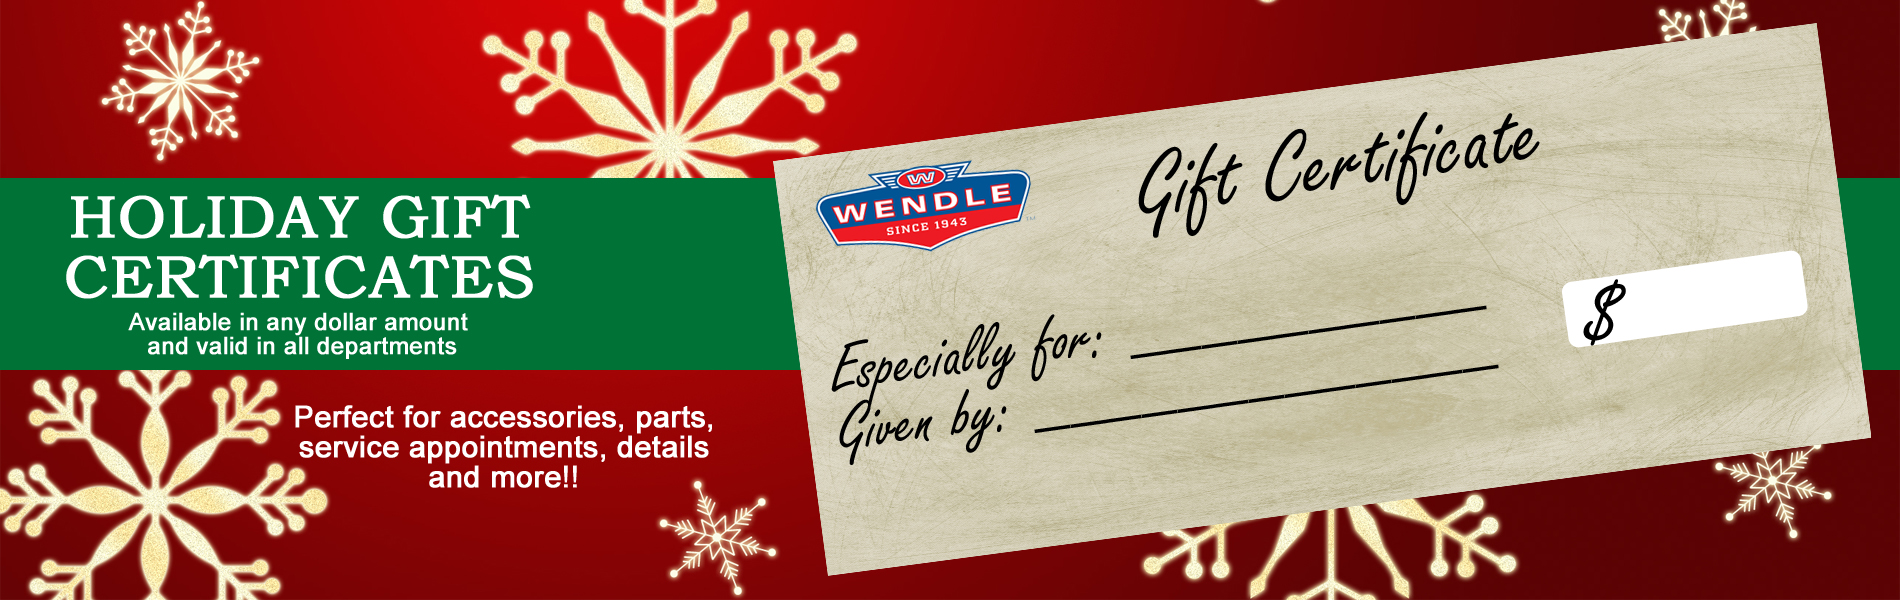 Buy a gift certificate at Wendle Ford Nissan for accessories, parts, service appointments details and more.